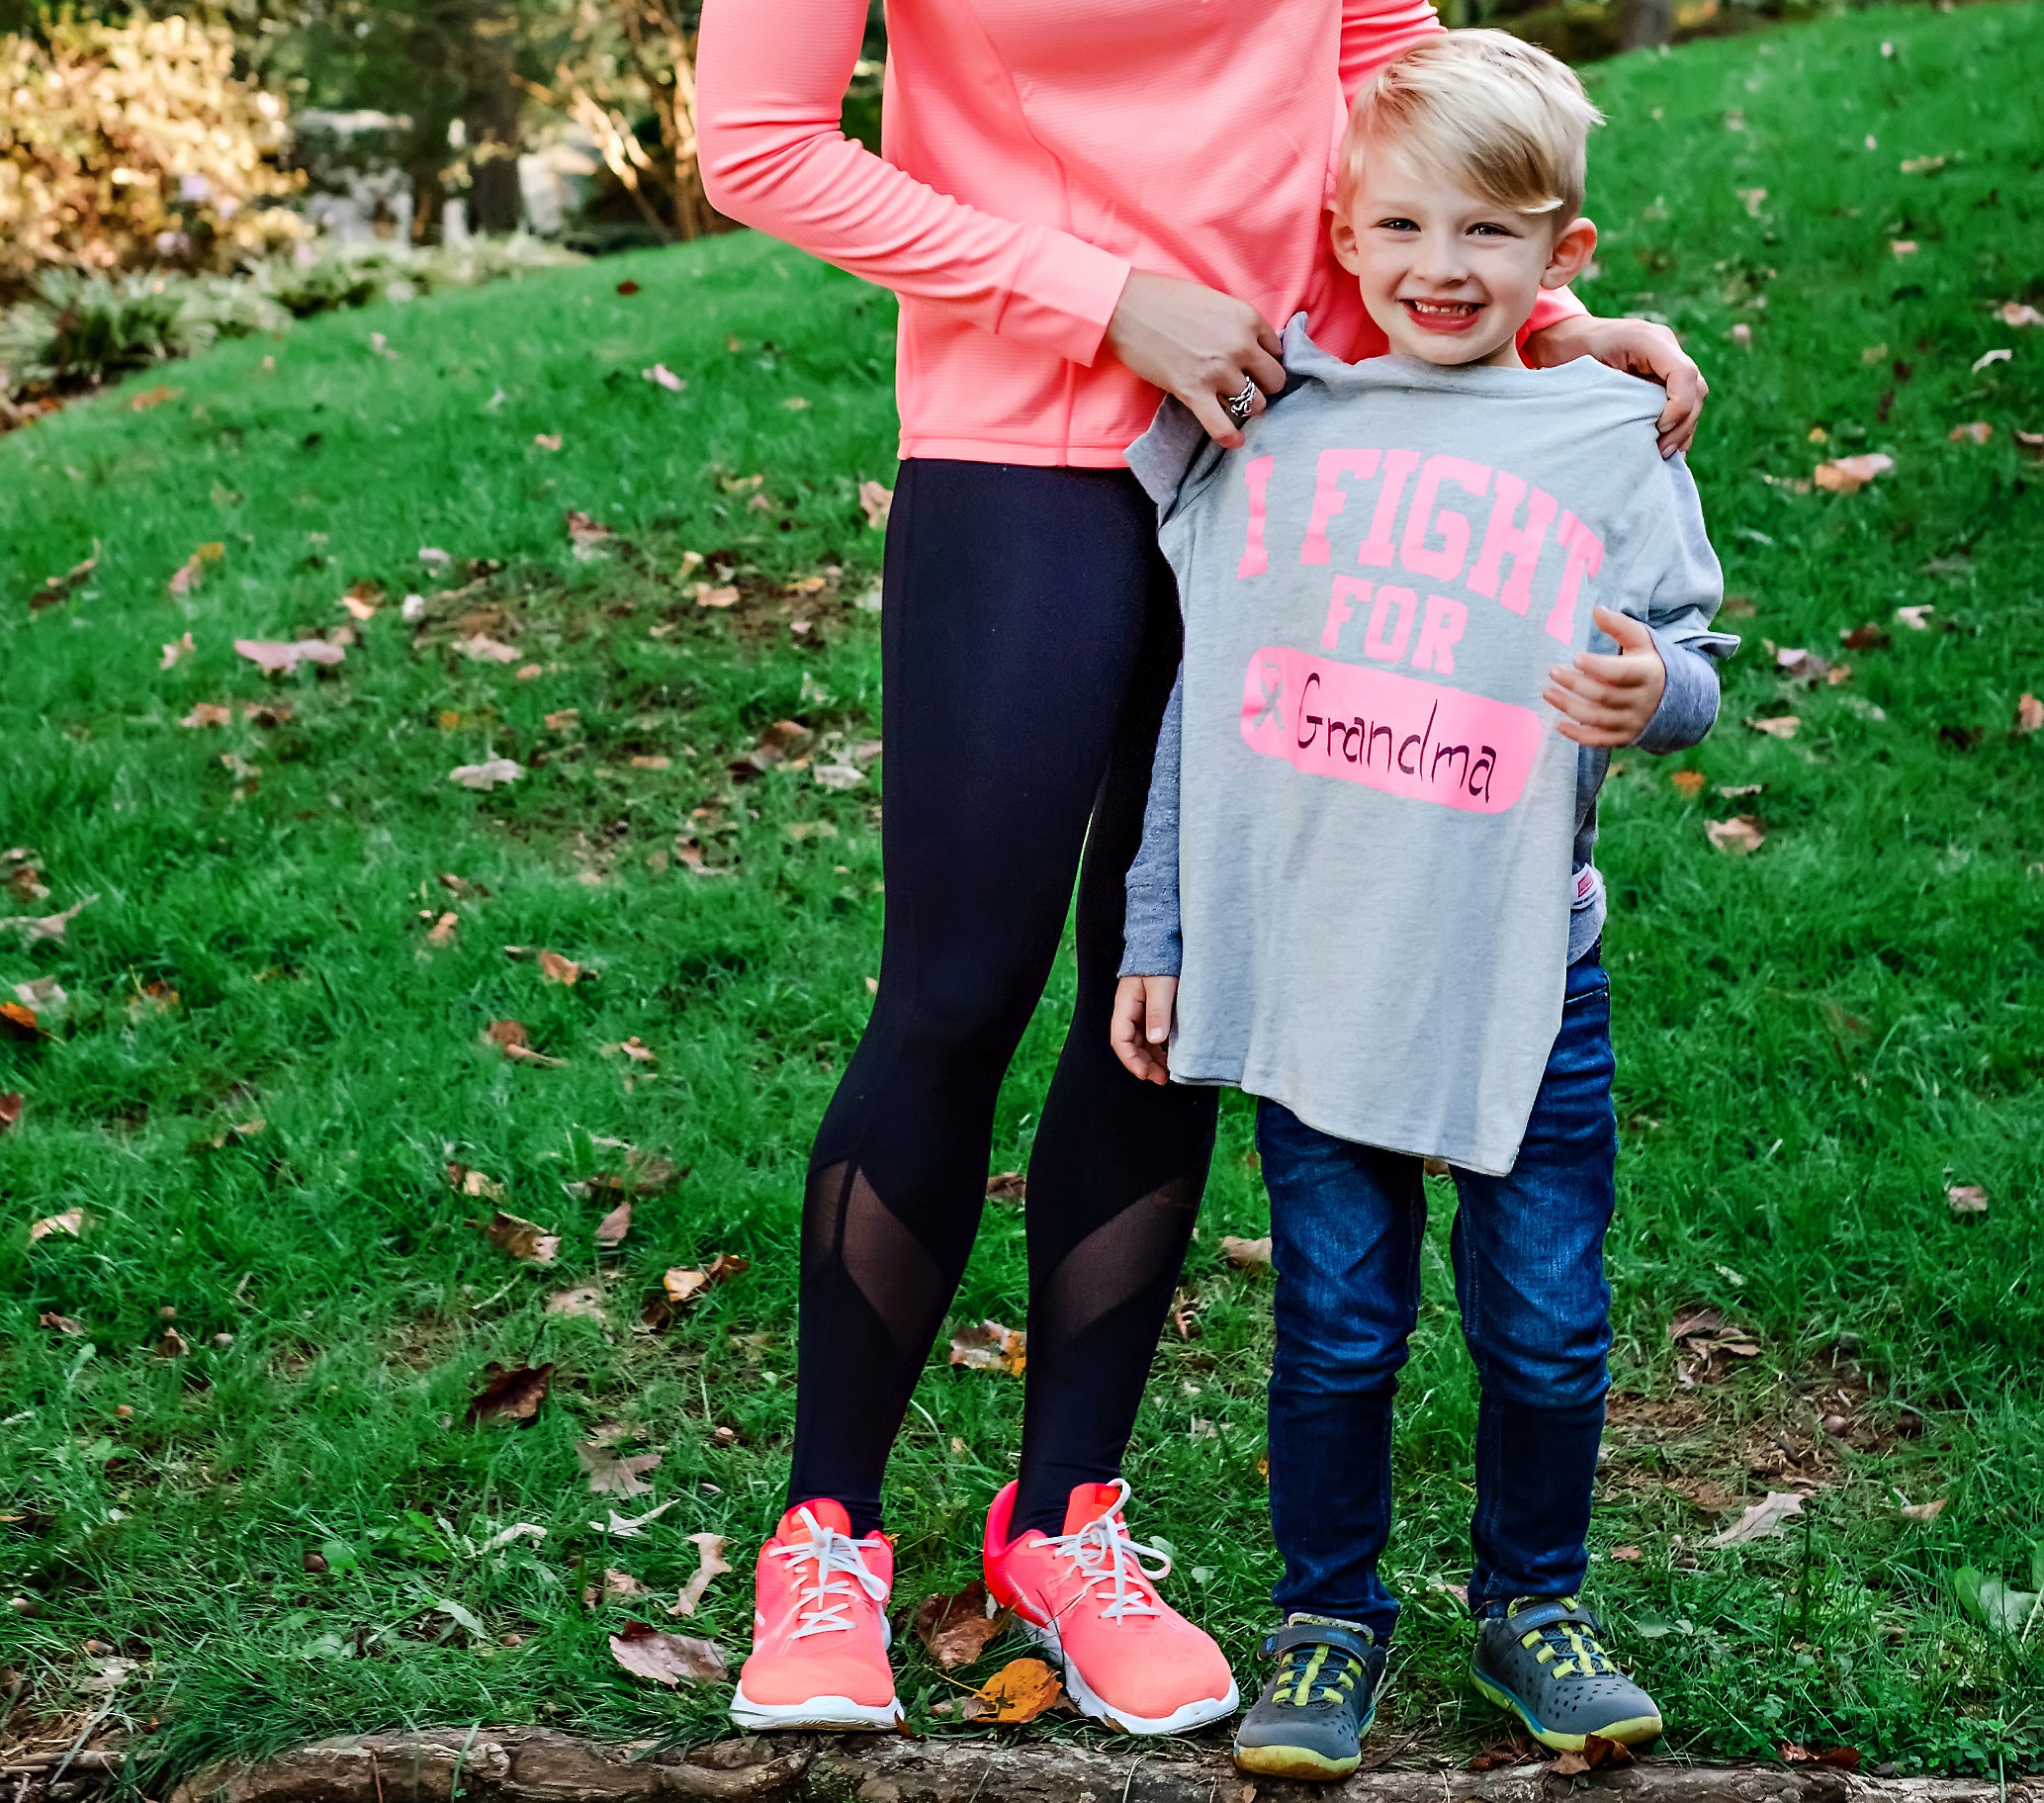 Breast Cancer Awareness with JCPenney by Atlanta style blogger Happily Hughes